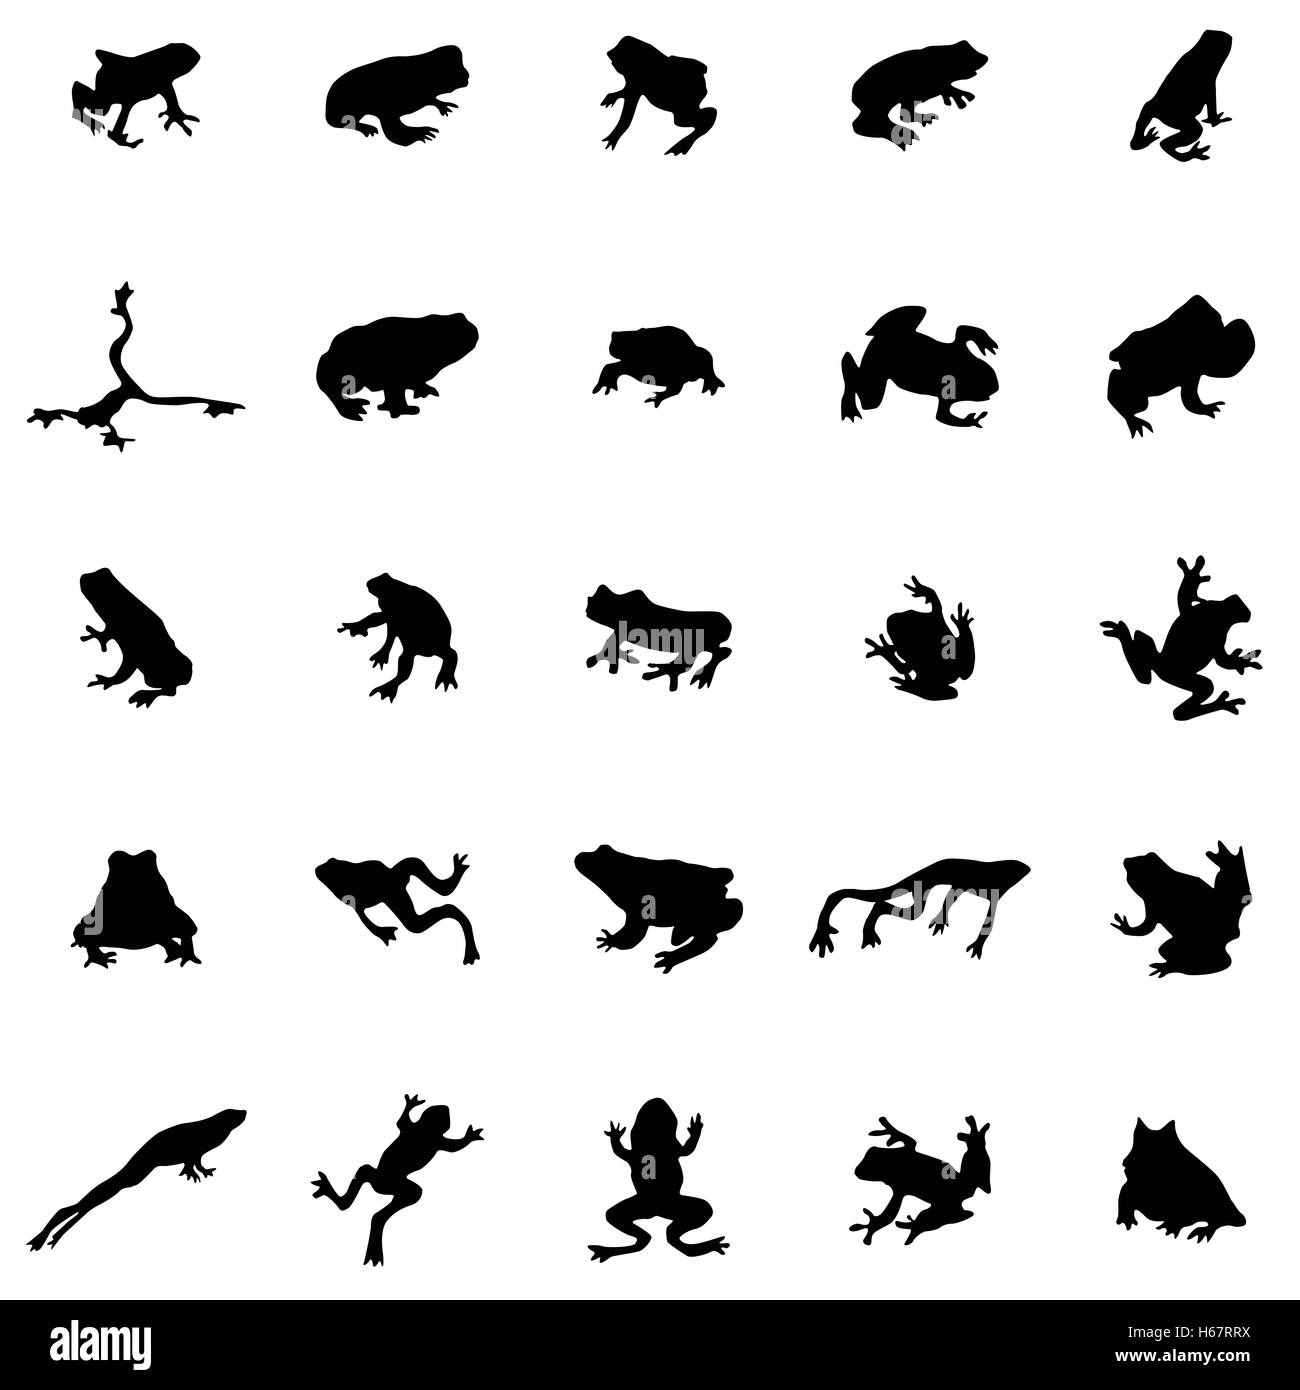 Frog silhouettes set Stock Vector